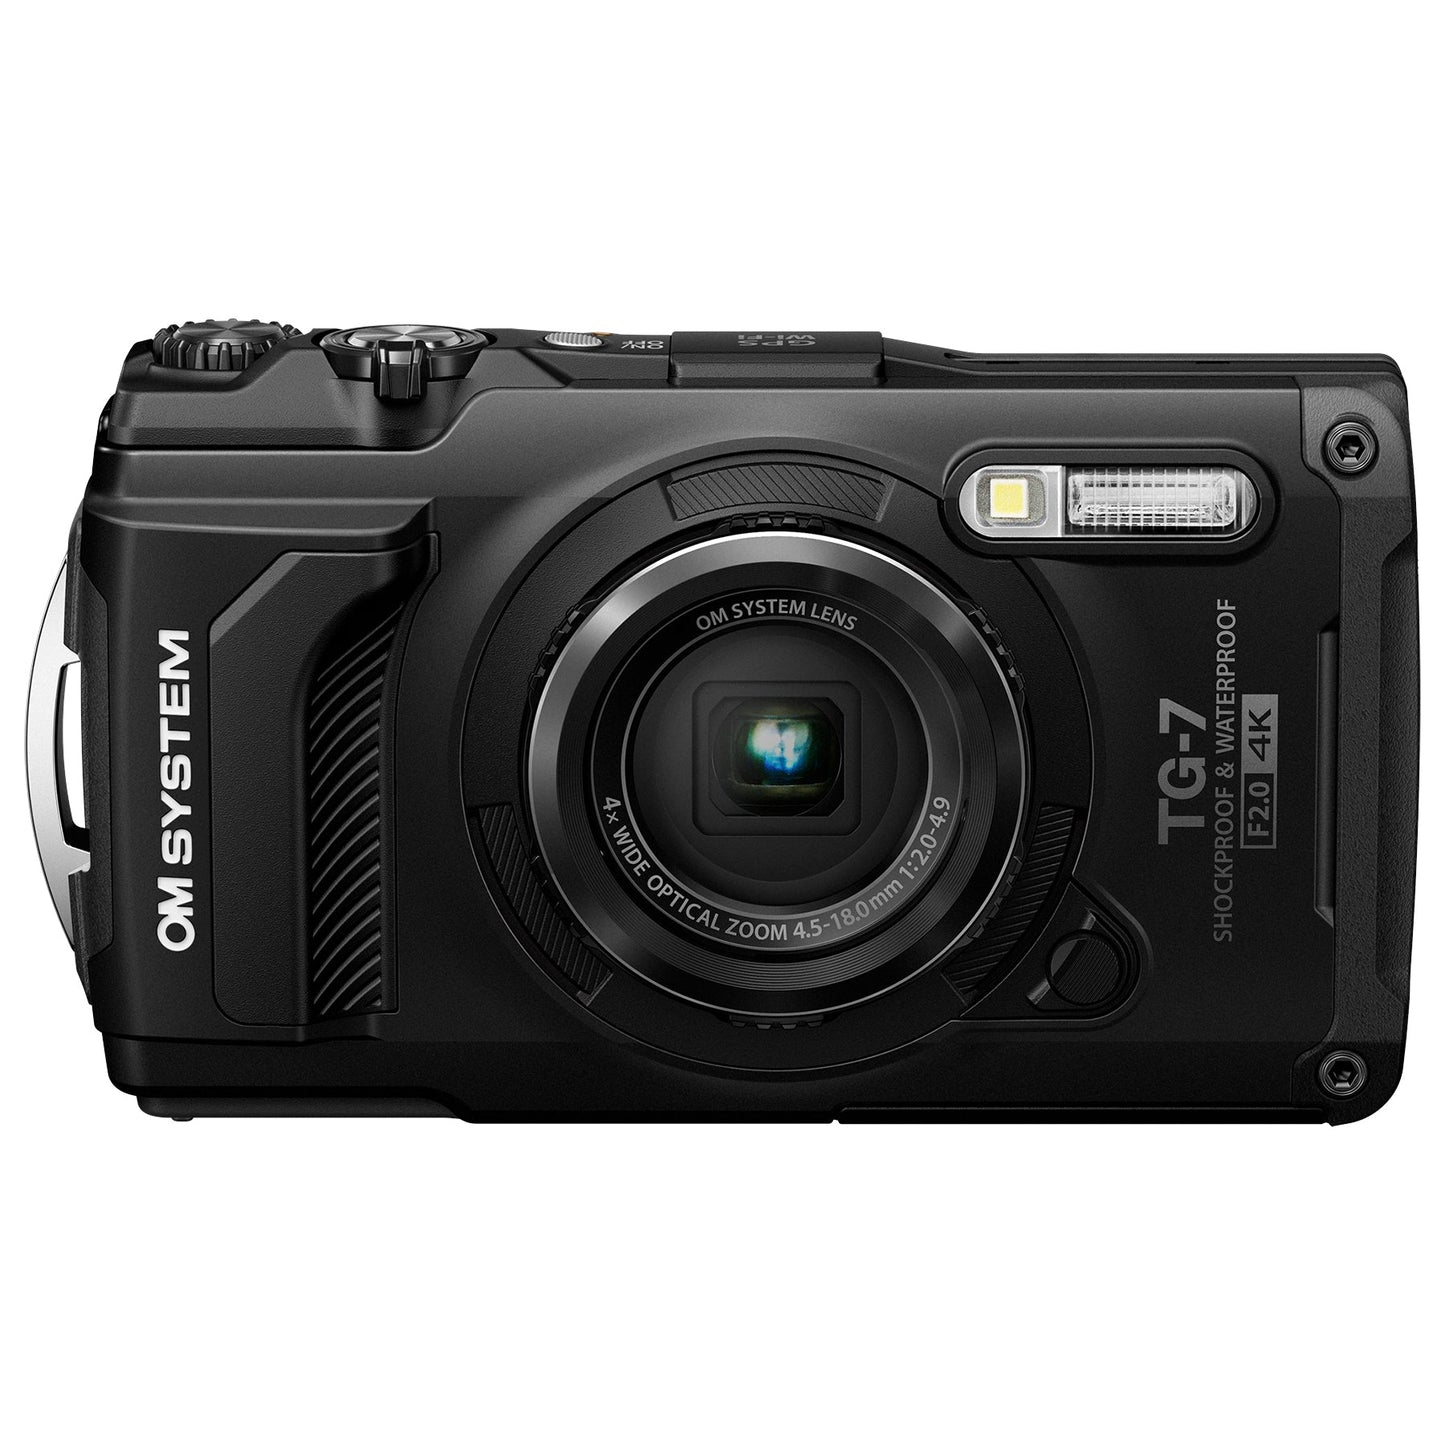 OM System TG-7 12MP 4x Zoom Tough Compact Camera - maplin.co.uk